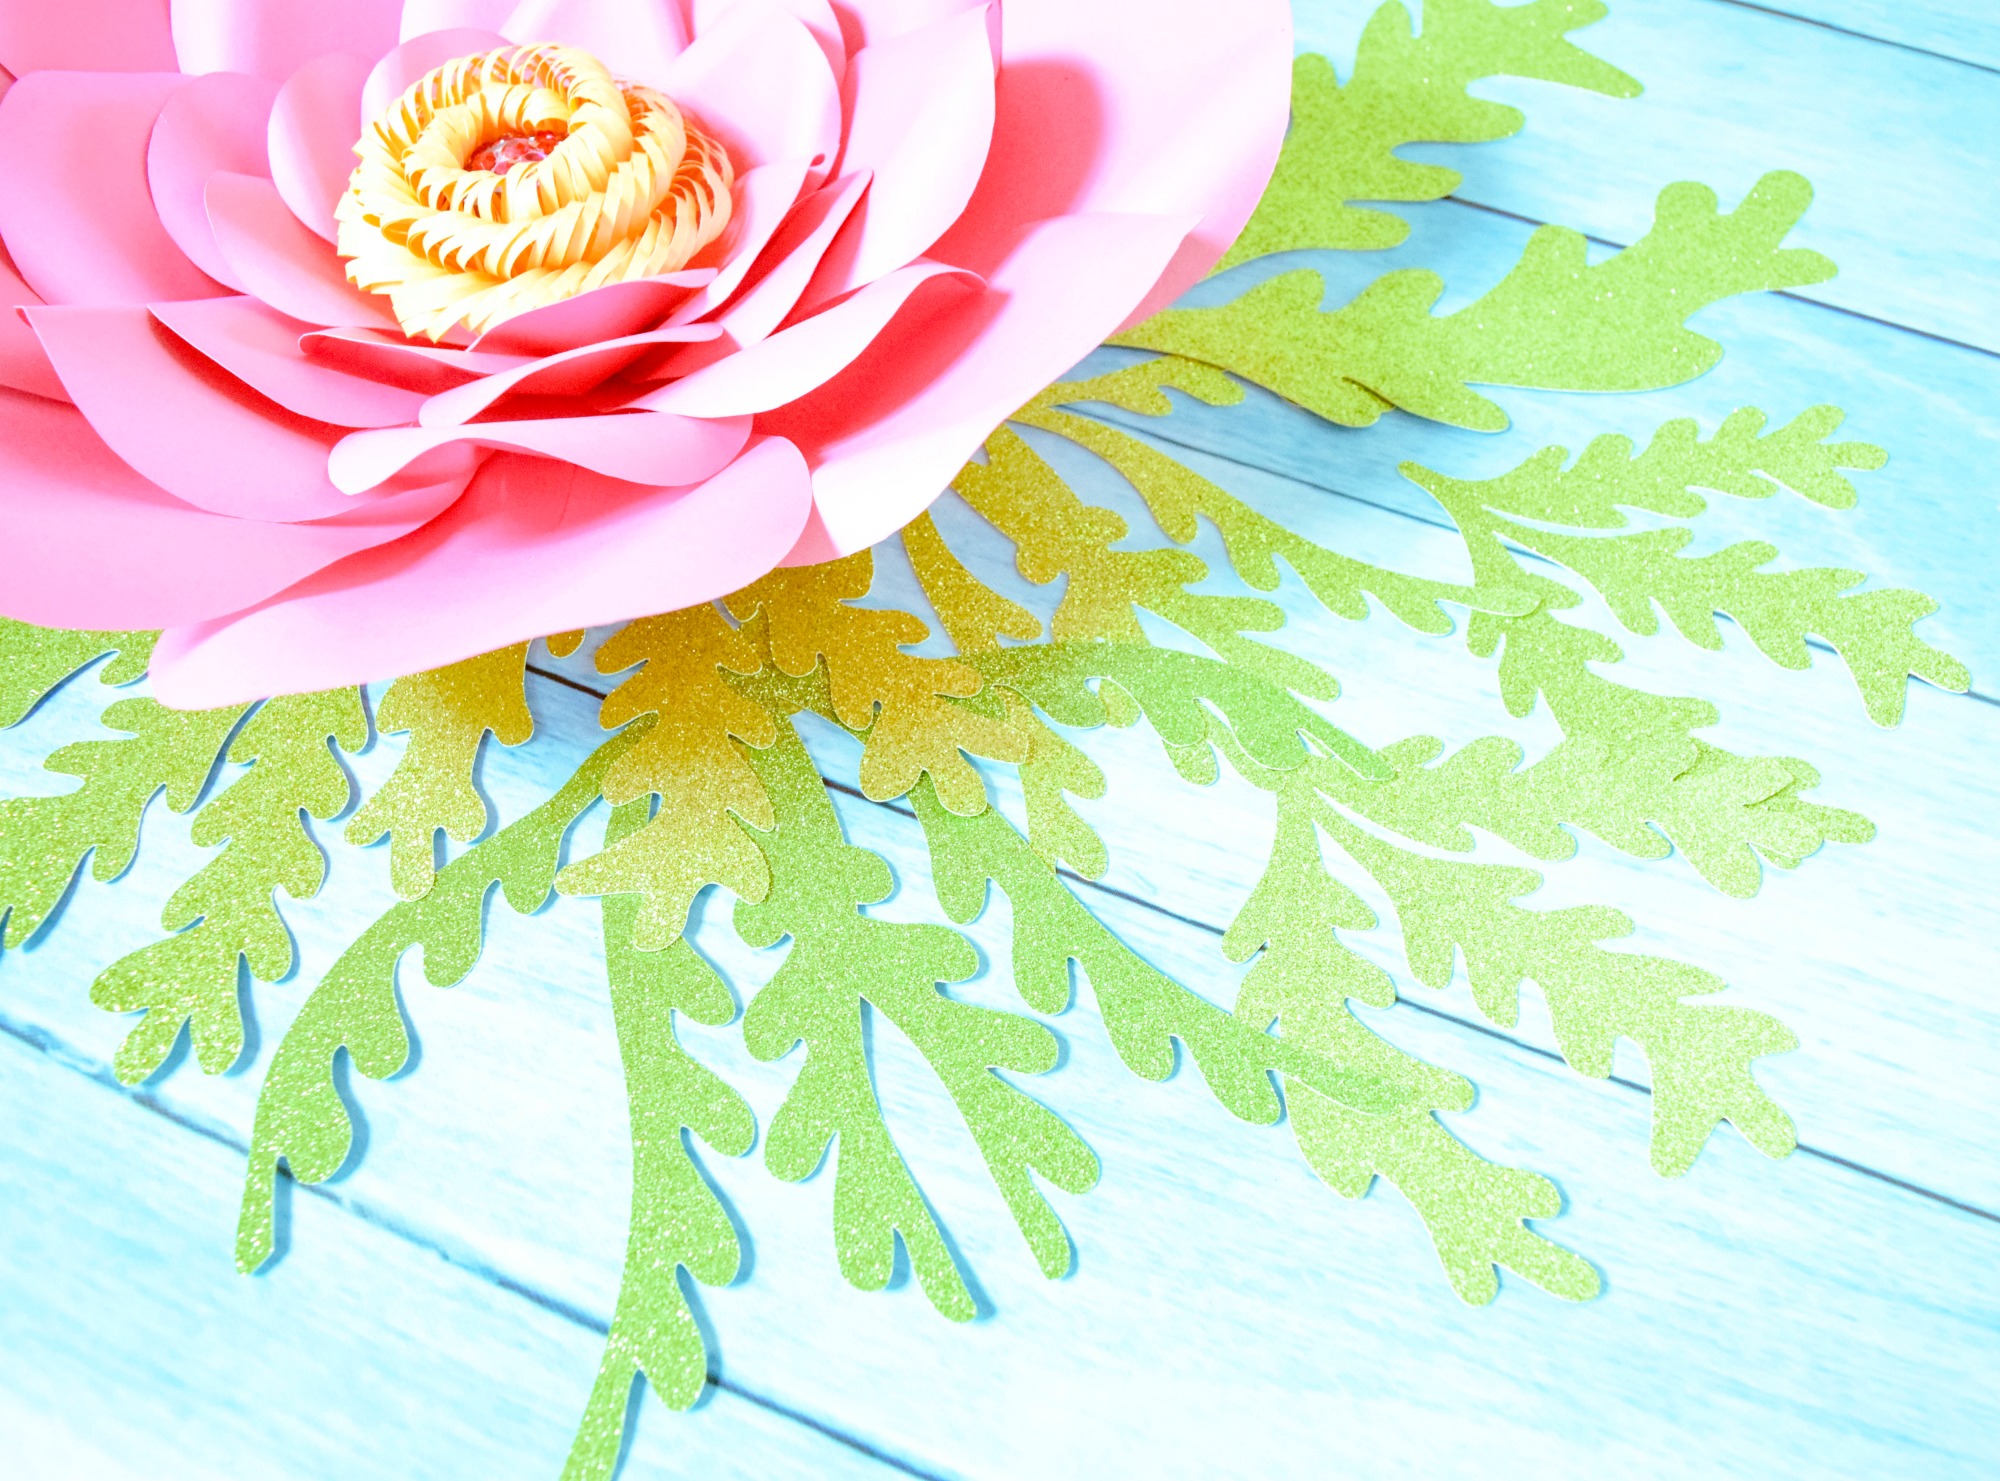 Branches of green glittery seaweed flow out from under a large pink paper flower, spread out on a blue table.